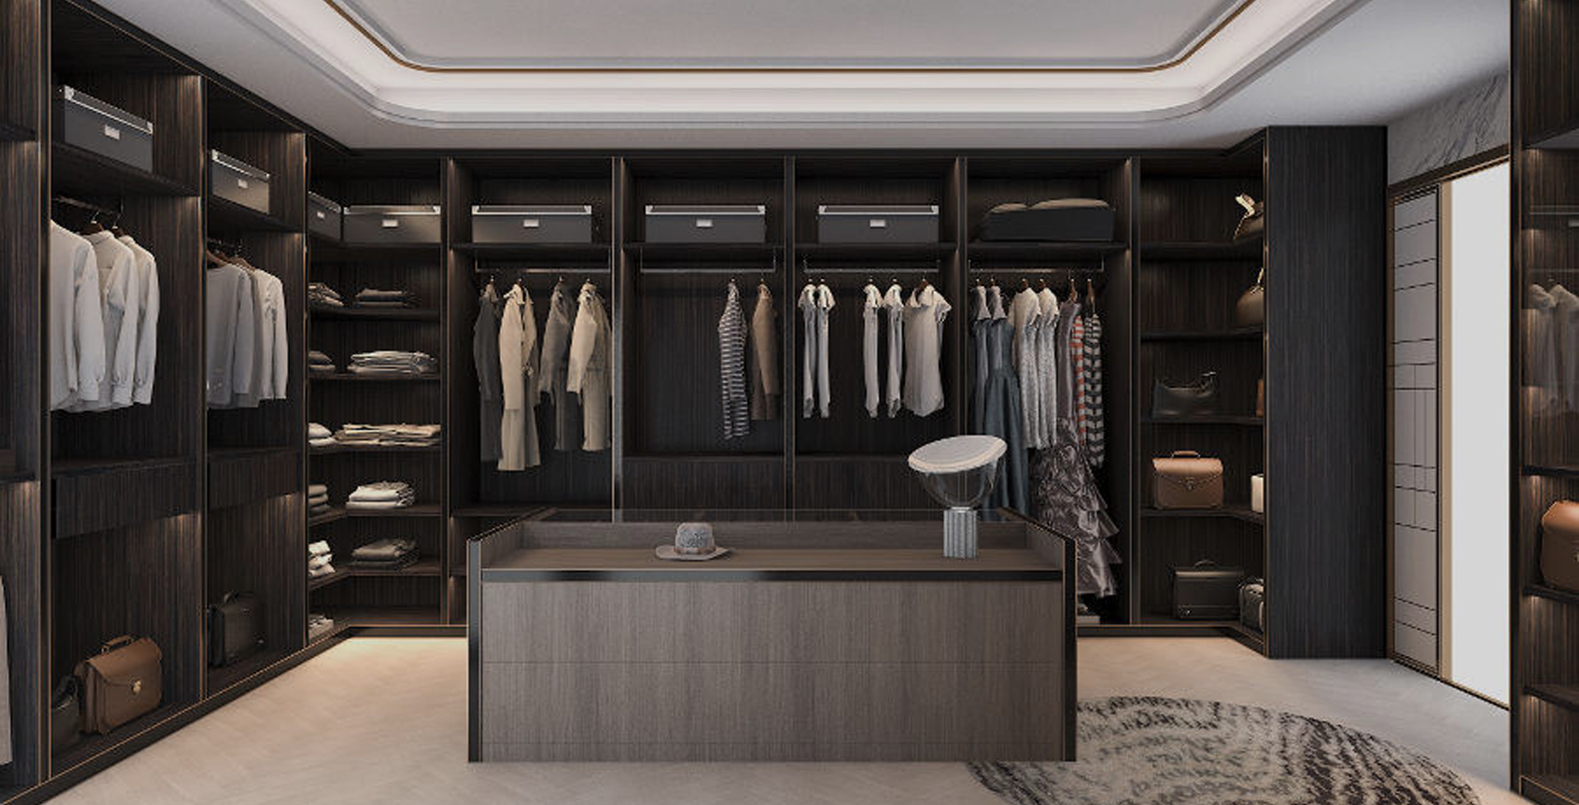 Modern wide space closet and dressing room